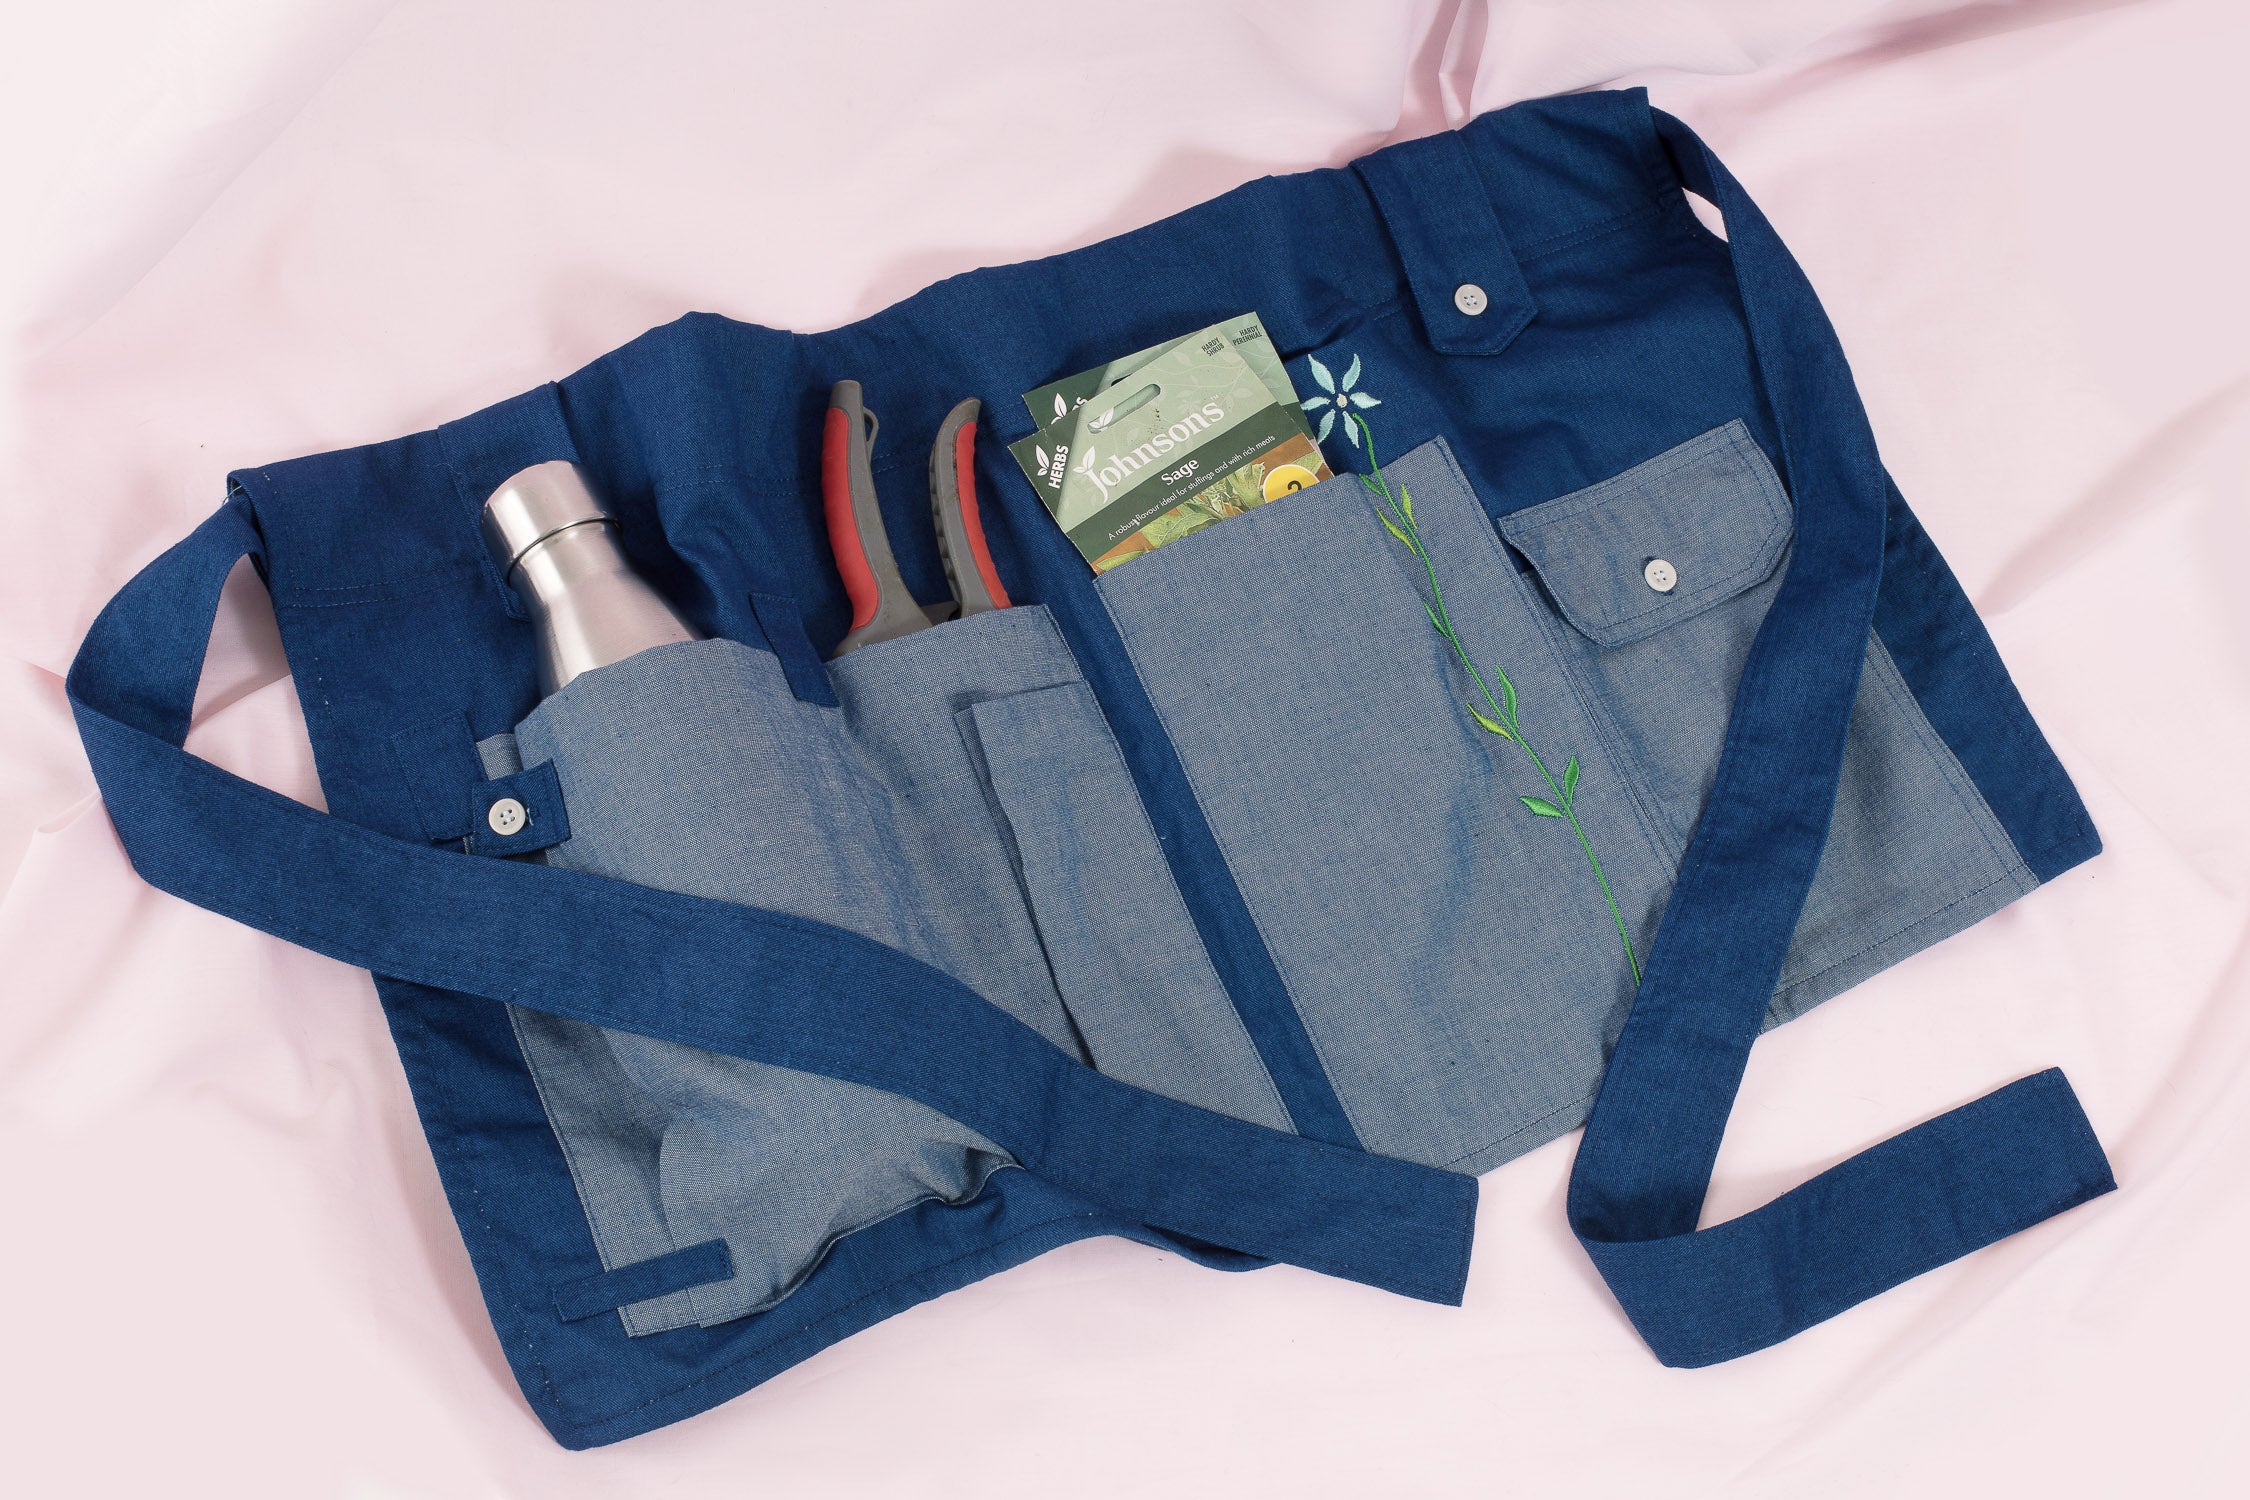 Multifunctional Gardener's Tool Belt made from 100% Japanese denim dyed with natural indigo, by Saywood. Tool belt has gardening tools tucked into the pockets.